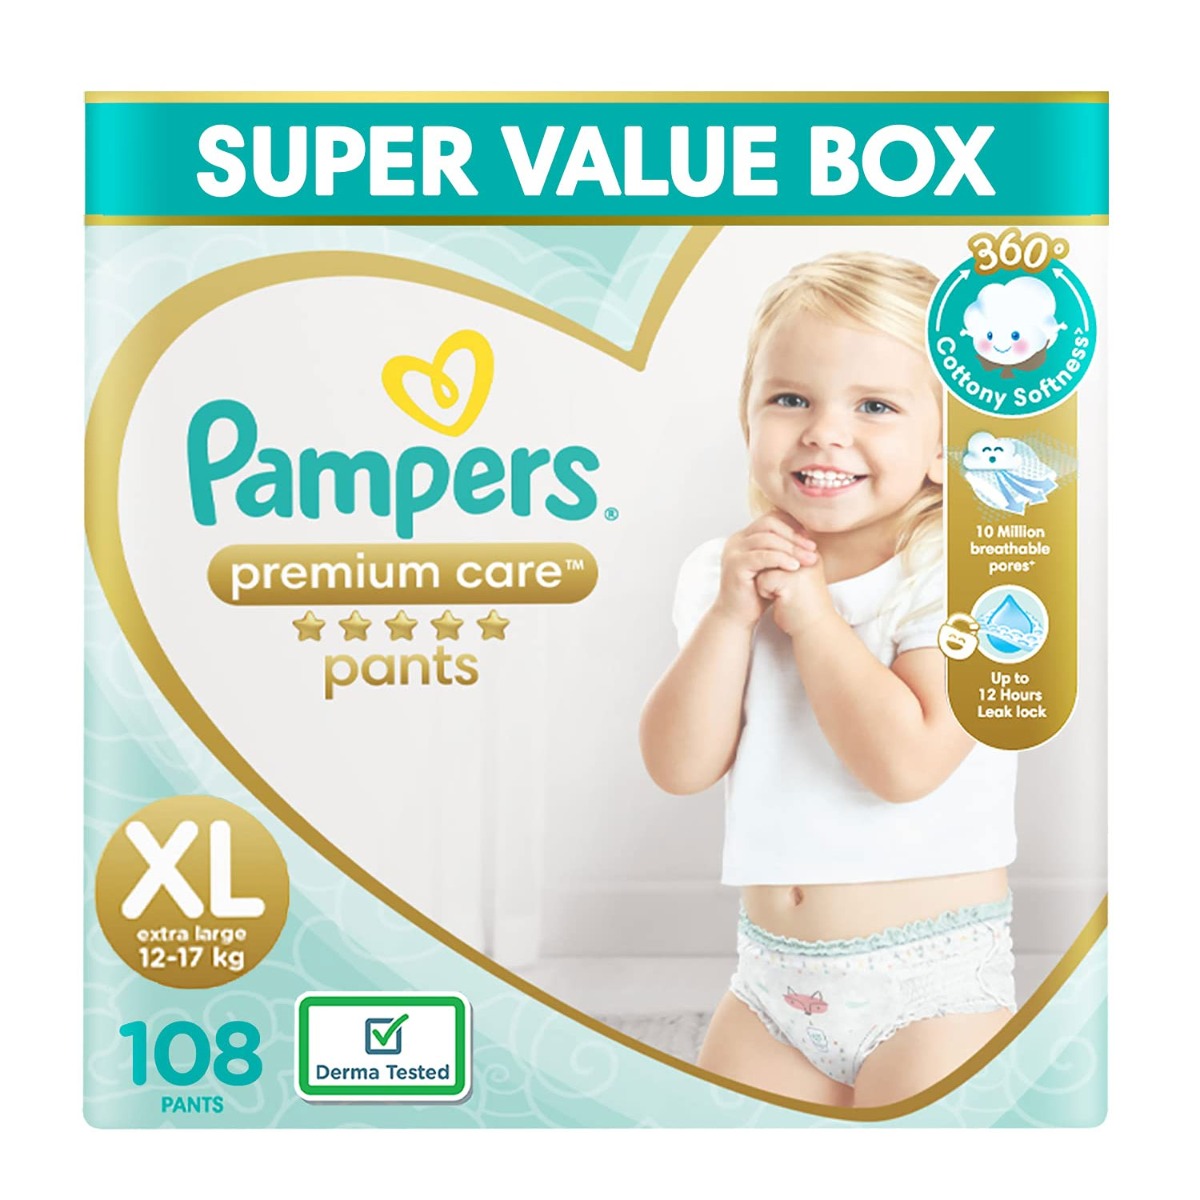 Pampers Premium Care Super Value Box Pack - XL, 108 Pack